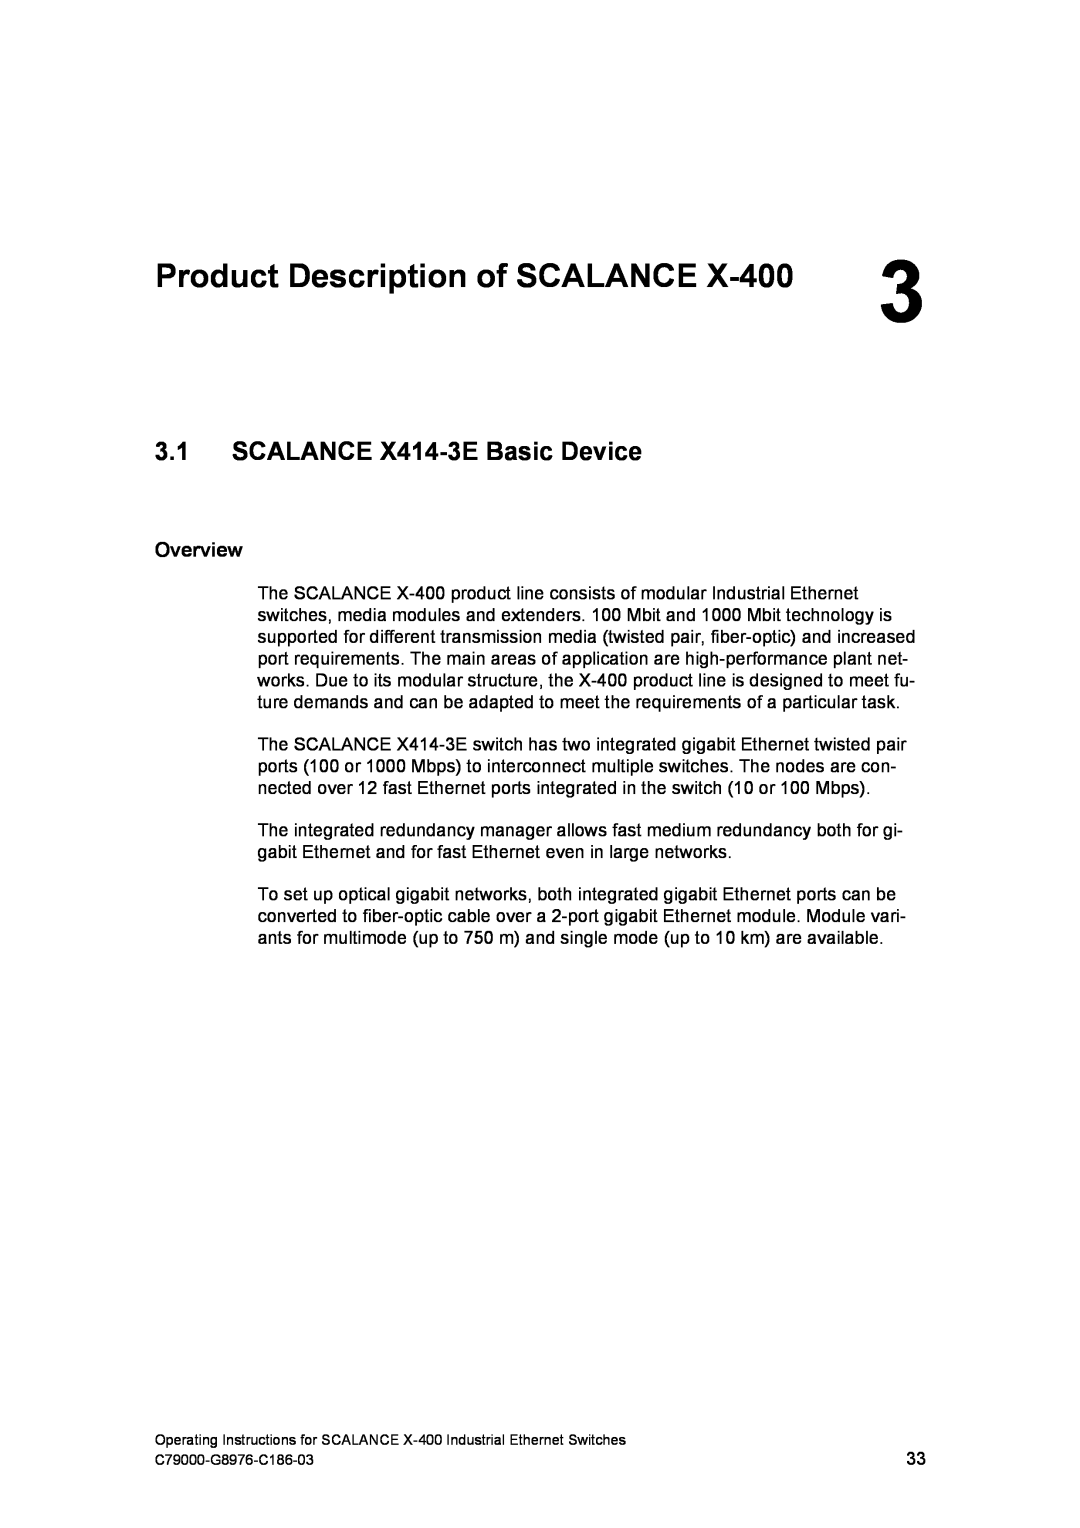 Siemens X-400 technical specifications Product Description of SCALANCE, SCALANCE X414-3E Basic Device, Overview 